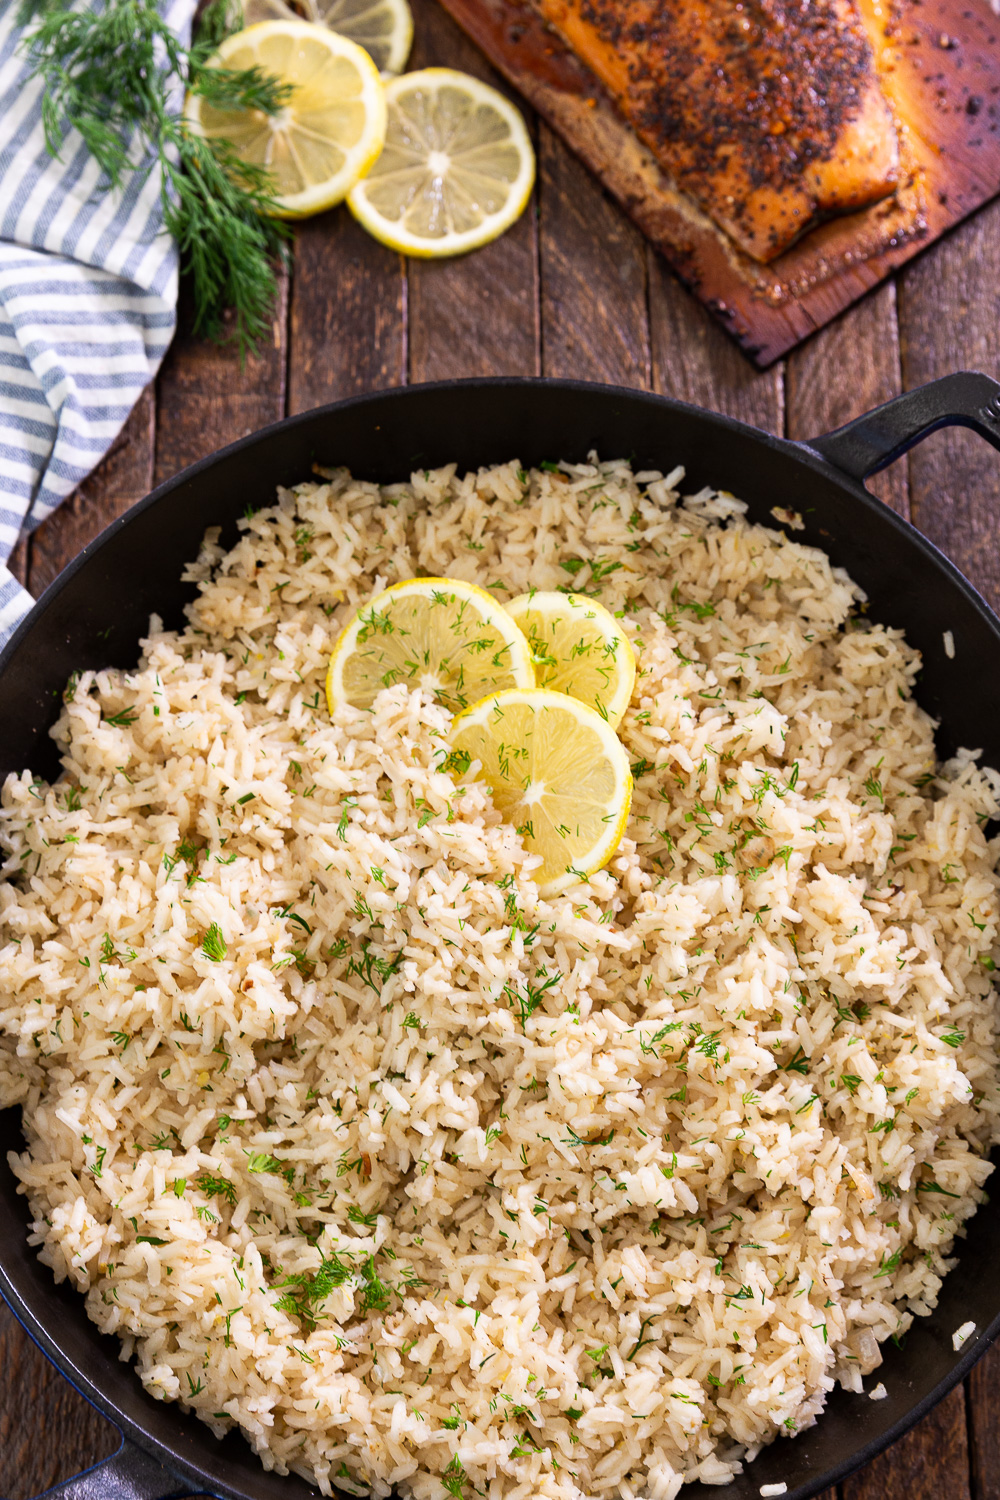 Lemon Dill Rice and Cedar Bay Salmon, this cedar plank salmon comes pre sauced and marinated, and can be served with this simple but delicious rice recipe. 